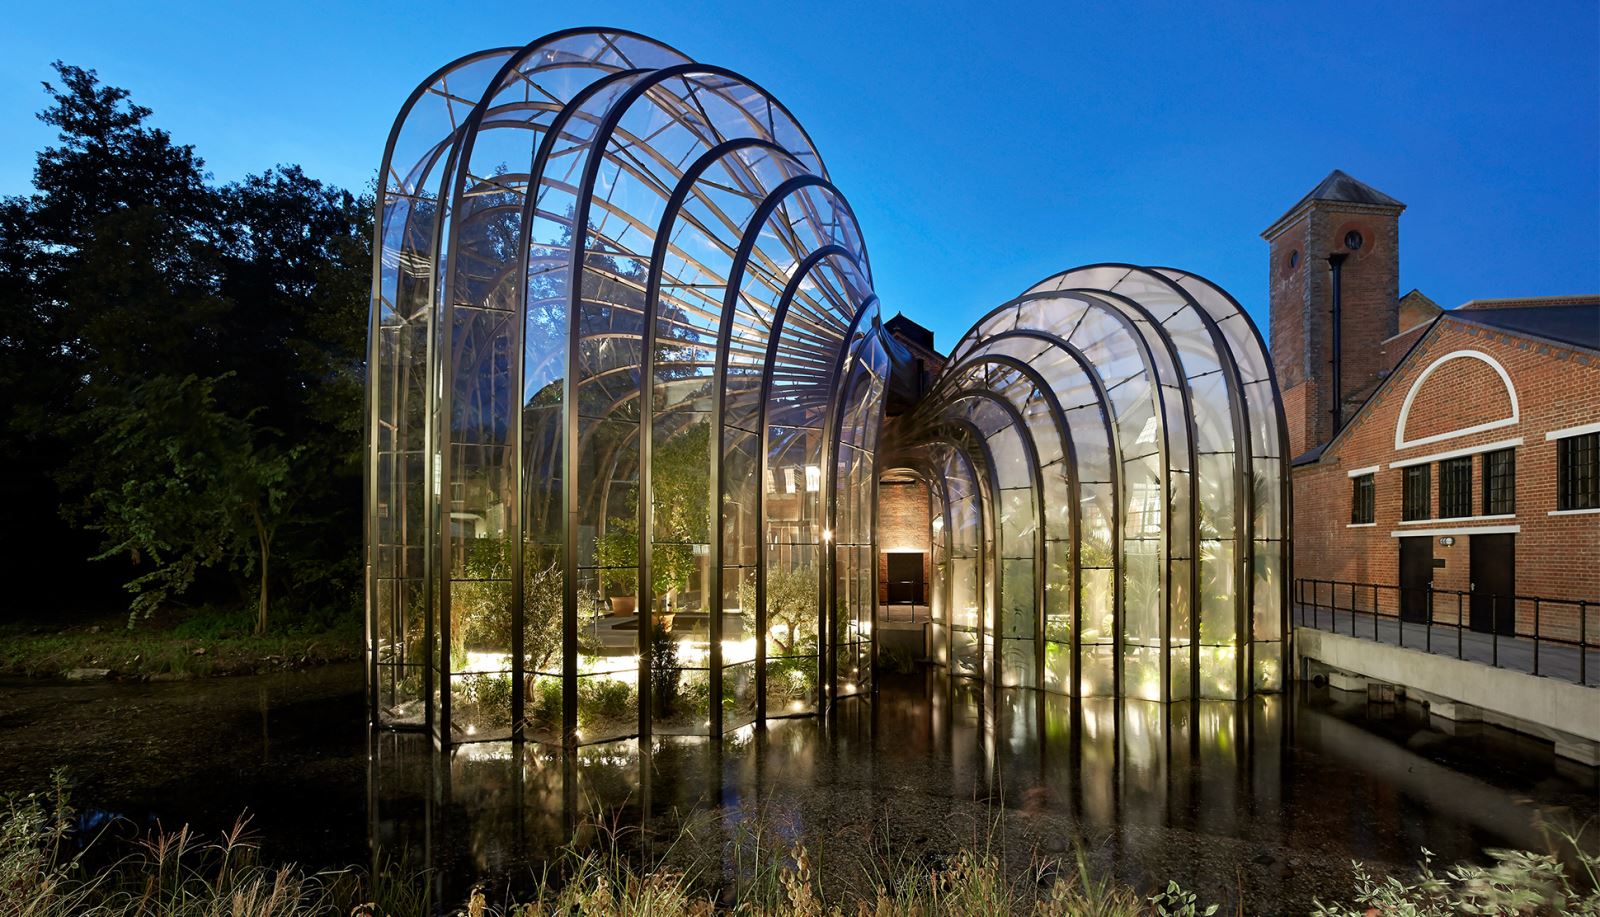 The glass houses at Bombay Sapphire Distillery